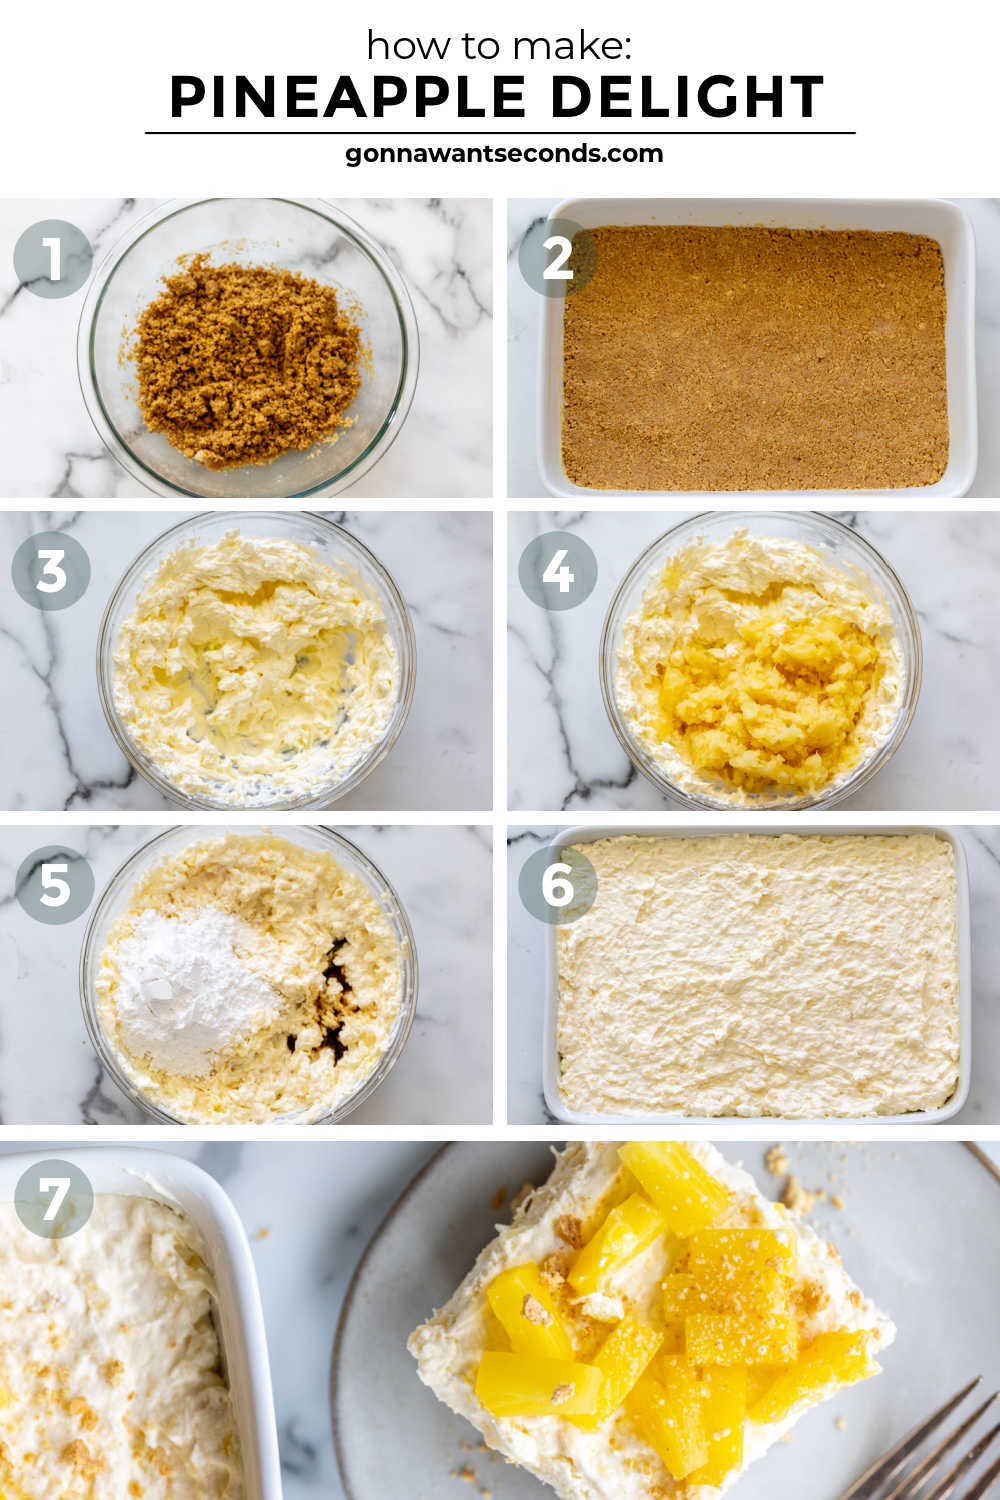 step by step how to make pineapple delight